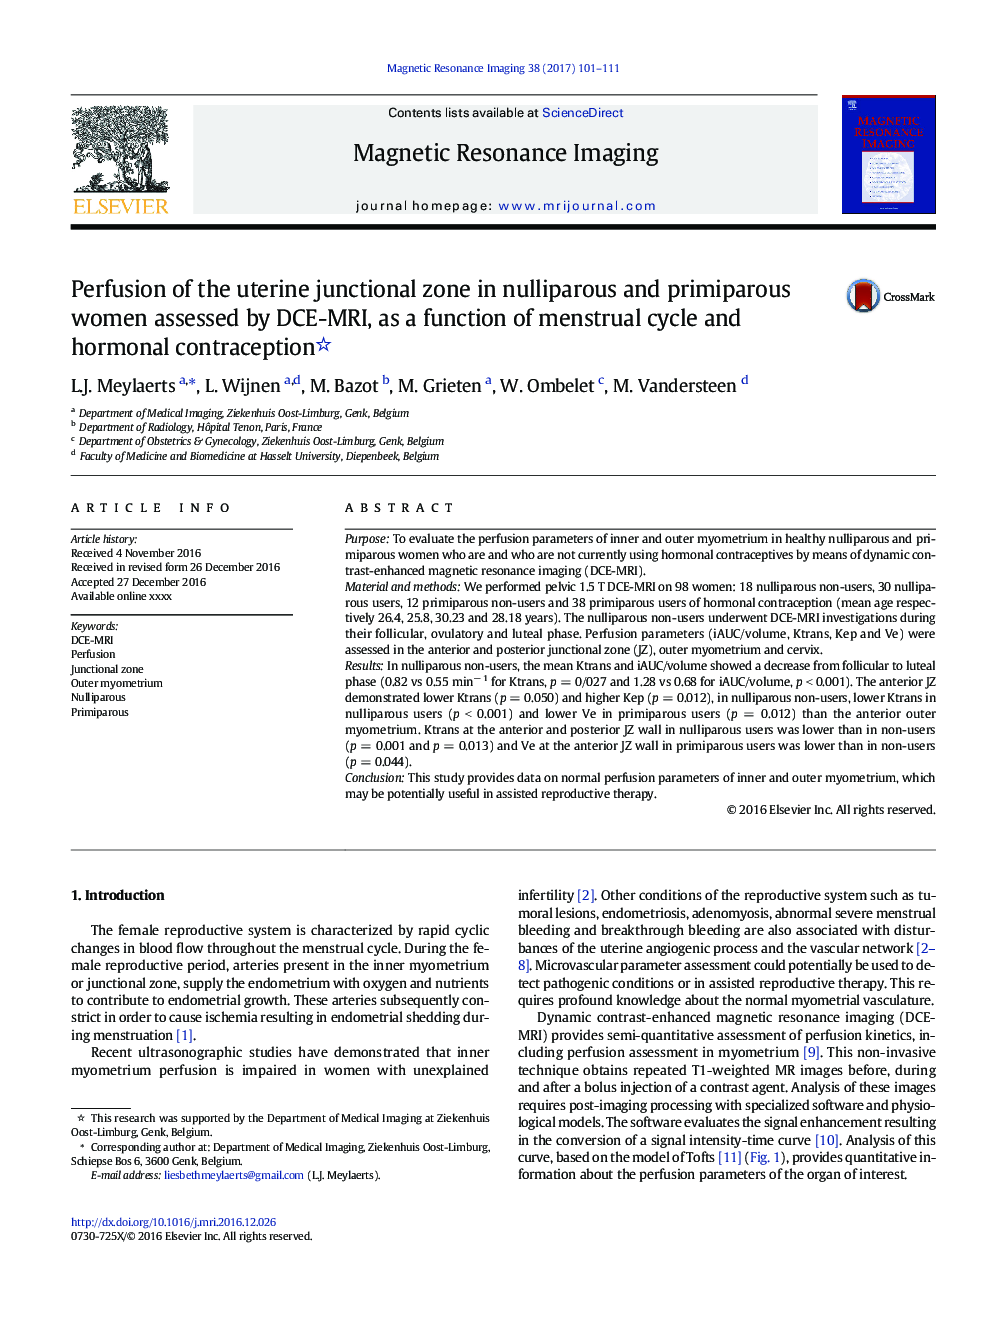 Perfusion of the uterine junctional zone in nulliparous and primiparous women assessed by DCE-MRI, as a function of menstrual cycle and hormonal contraception